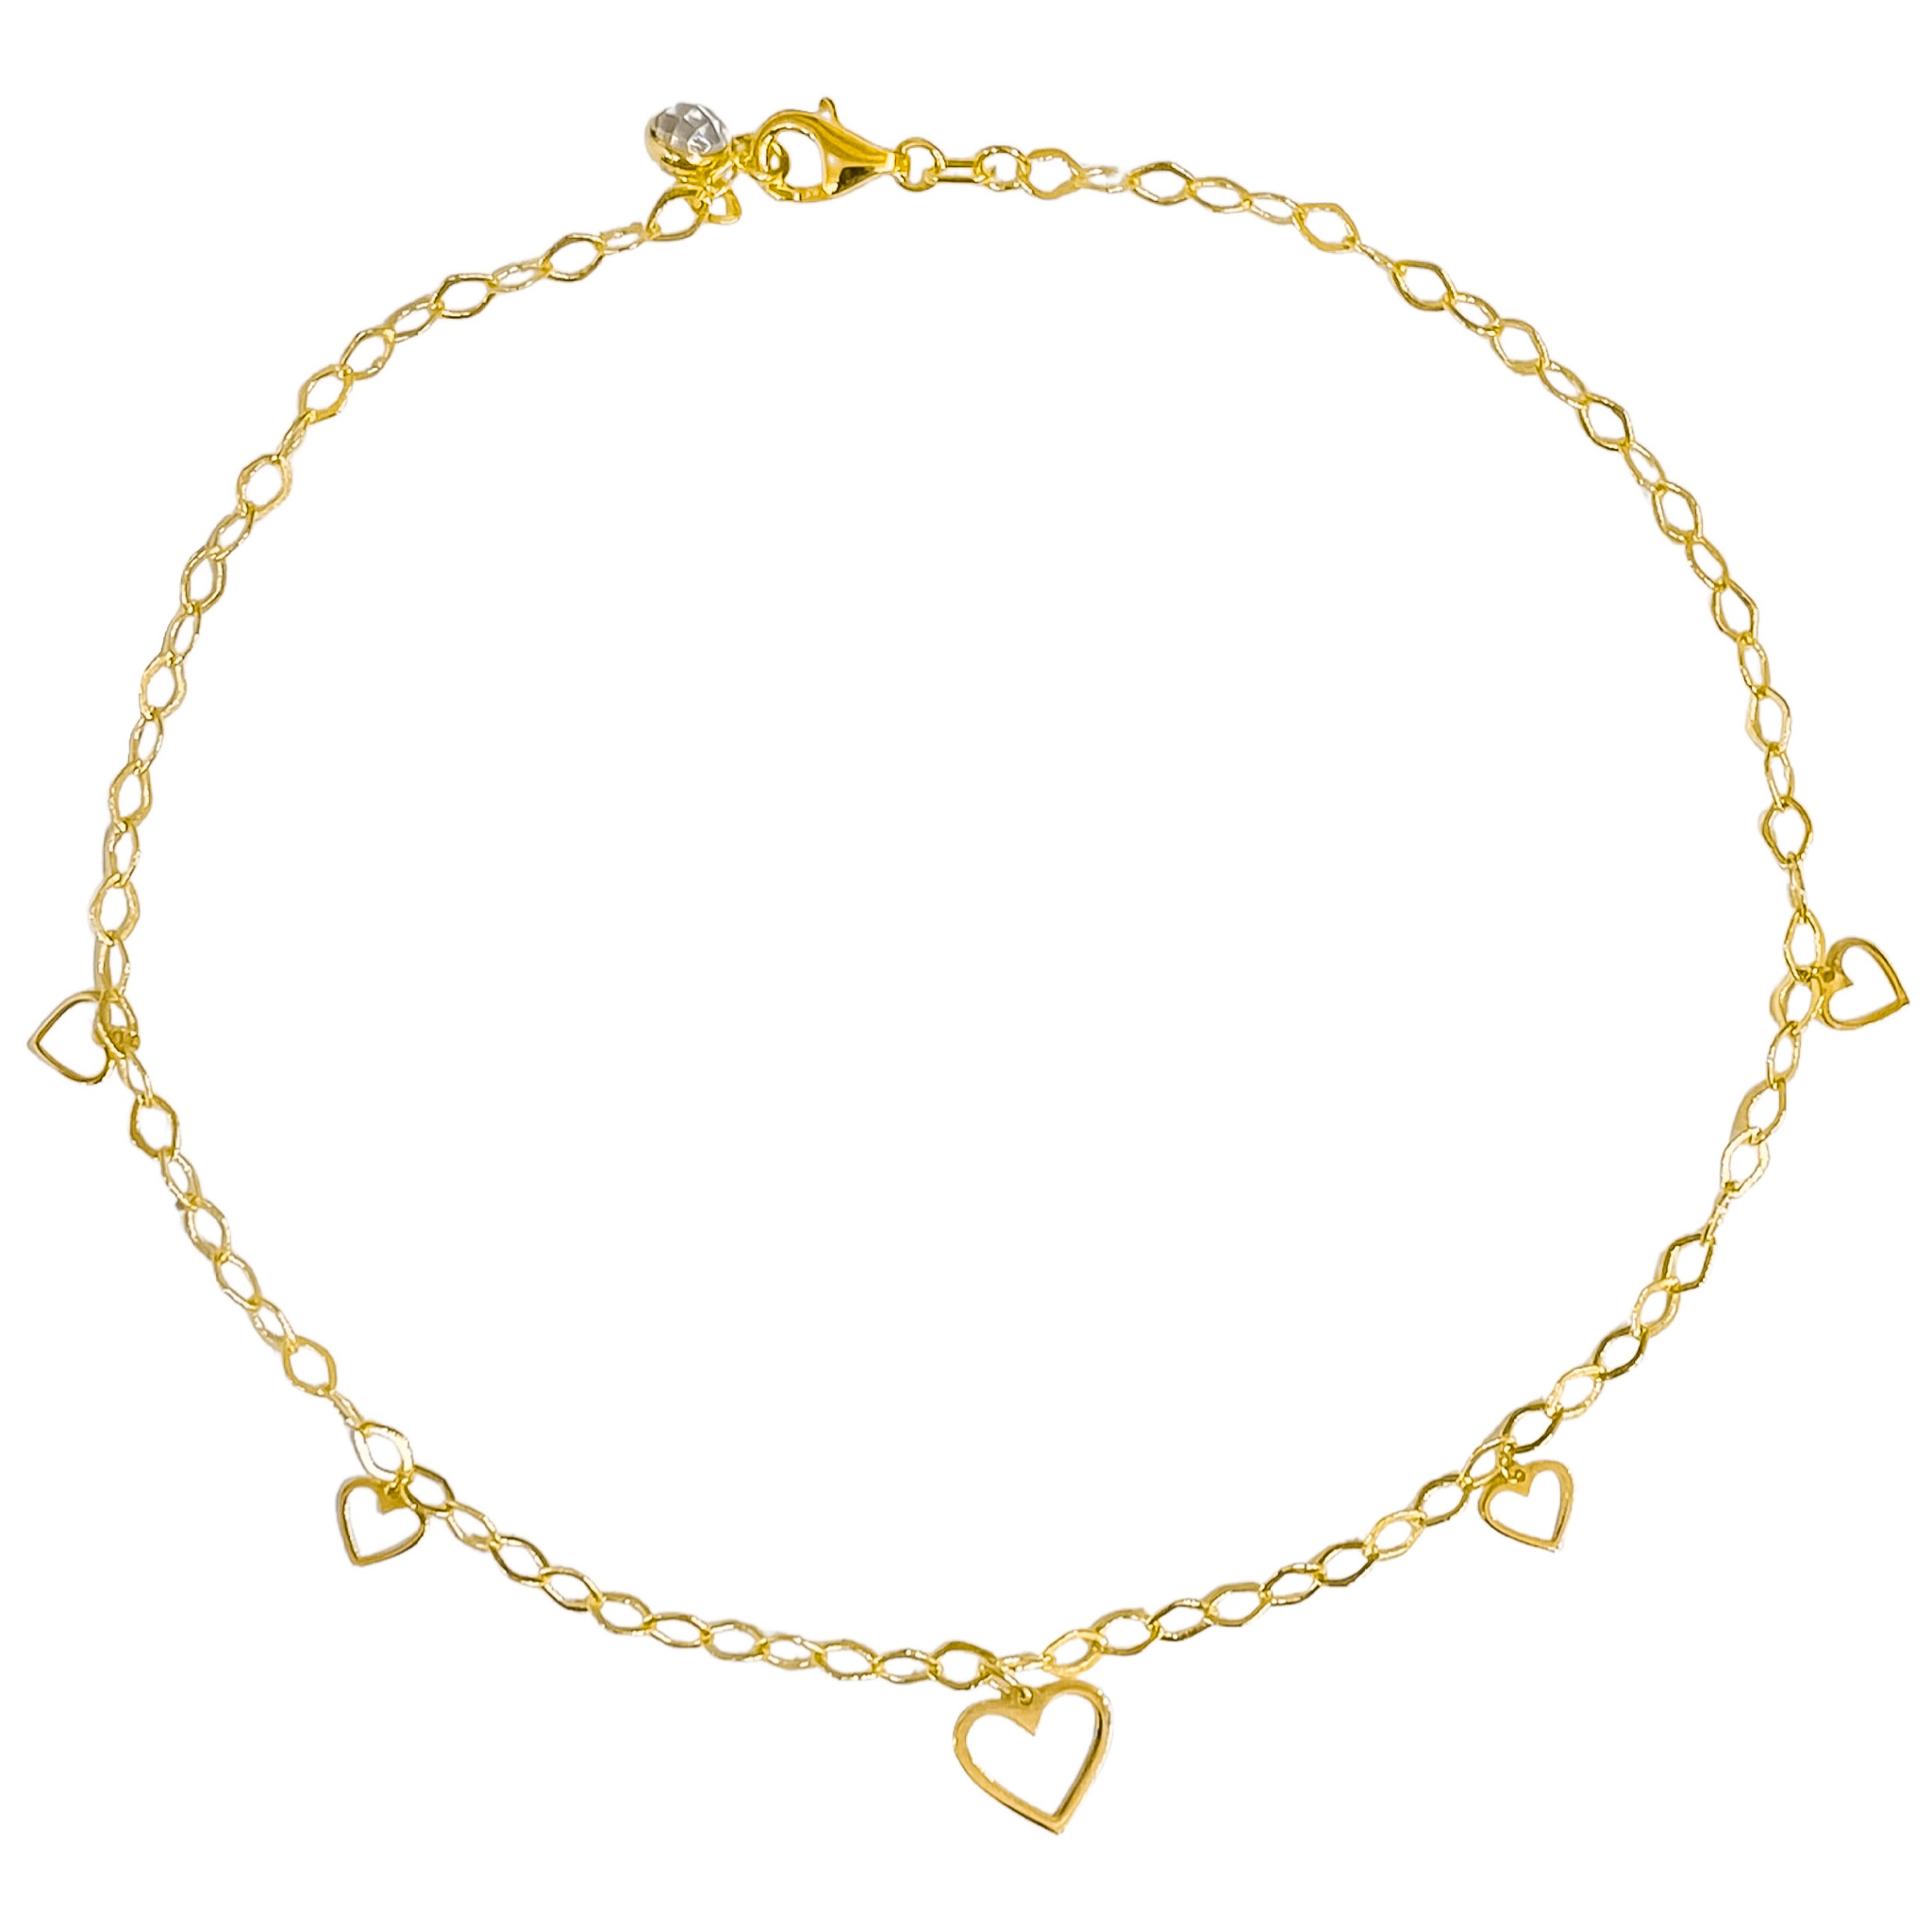 14K YELLOW GOLD HEART CHARMS ANKLET